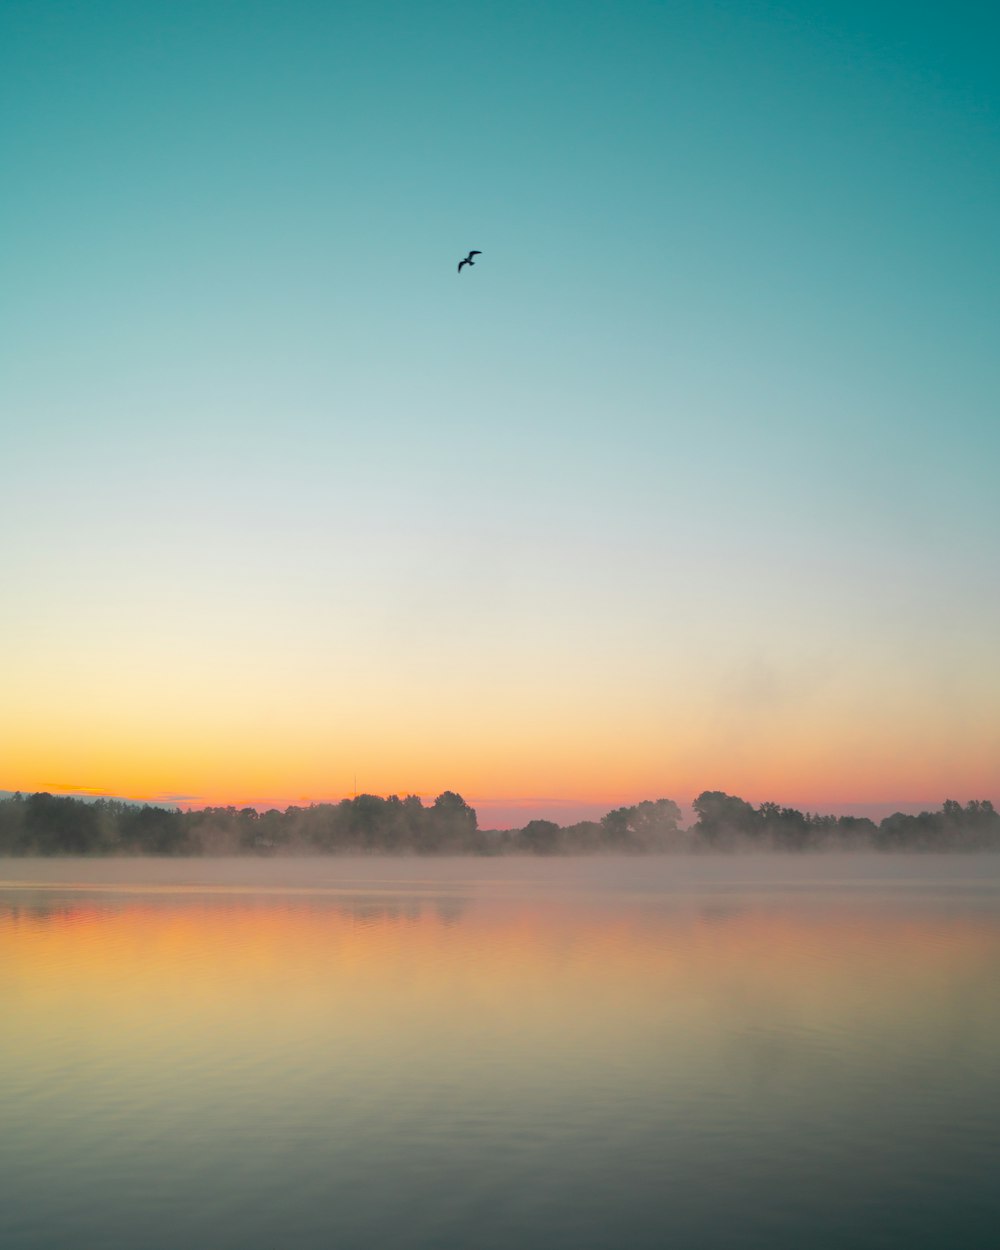 bird flying over the lake during sunset